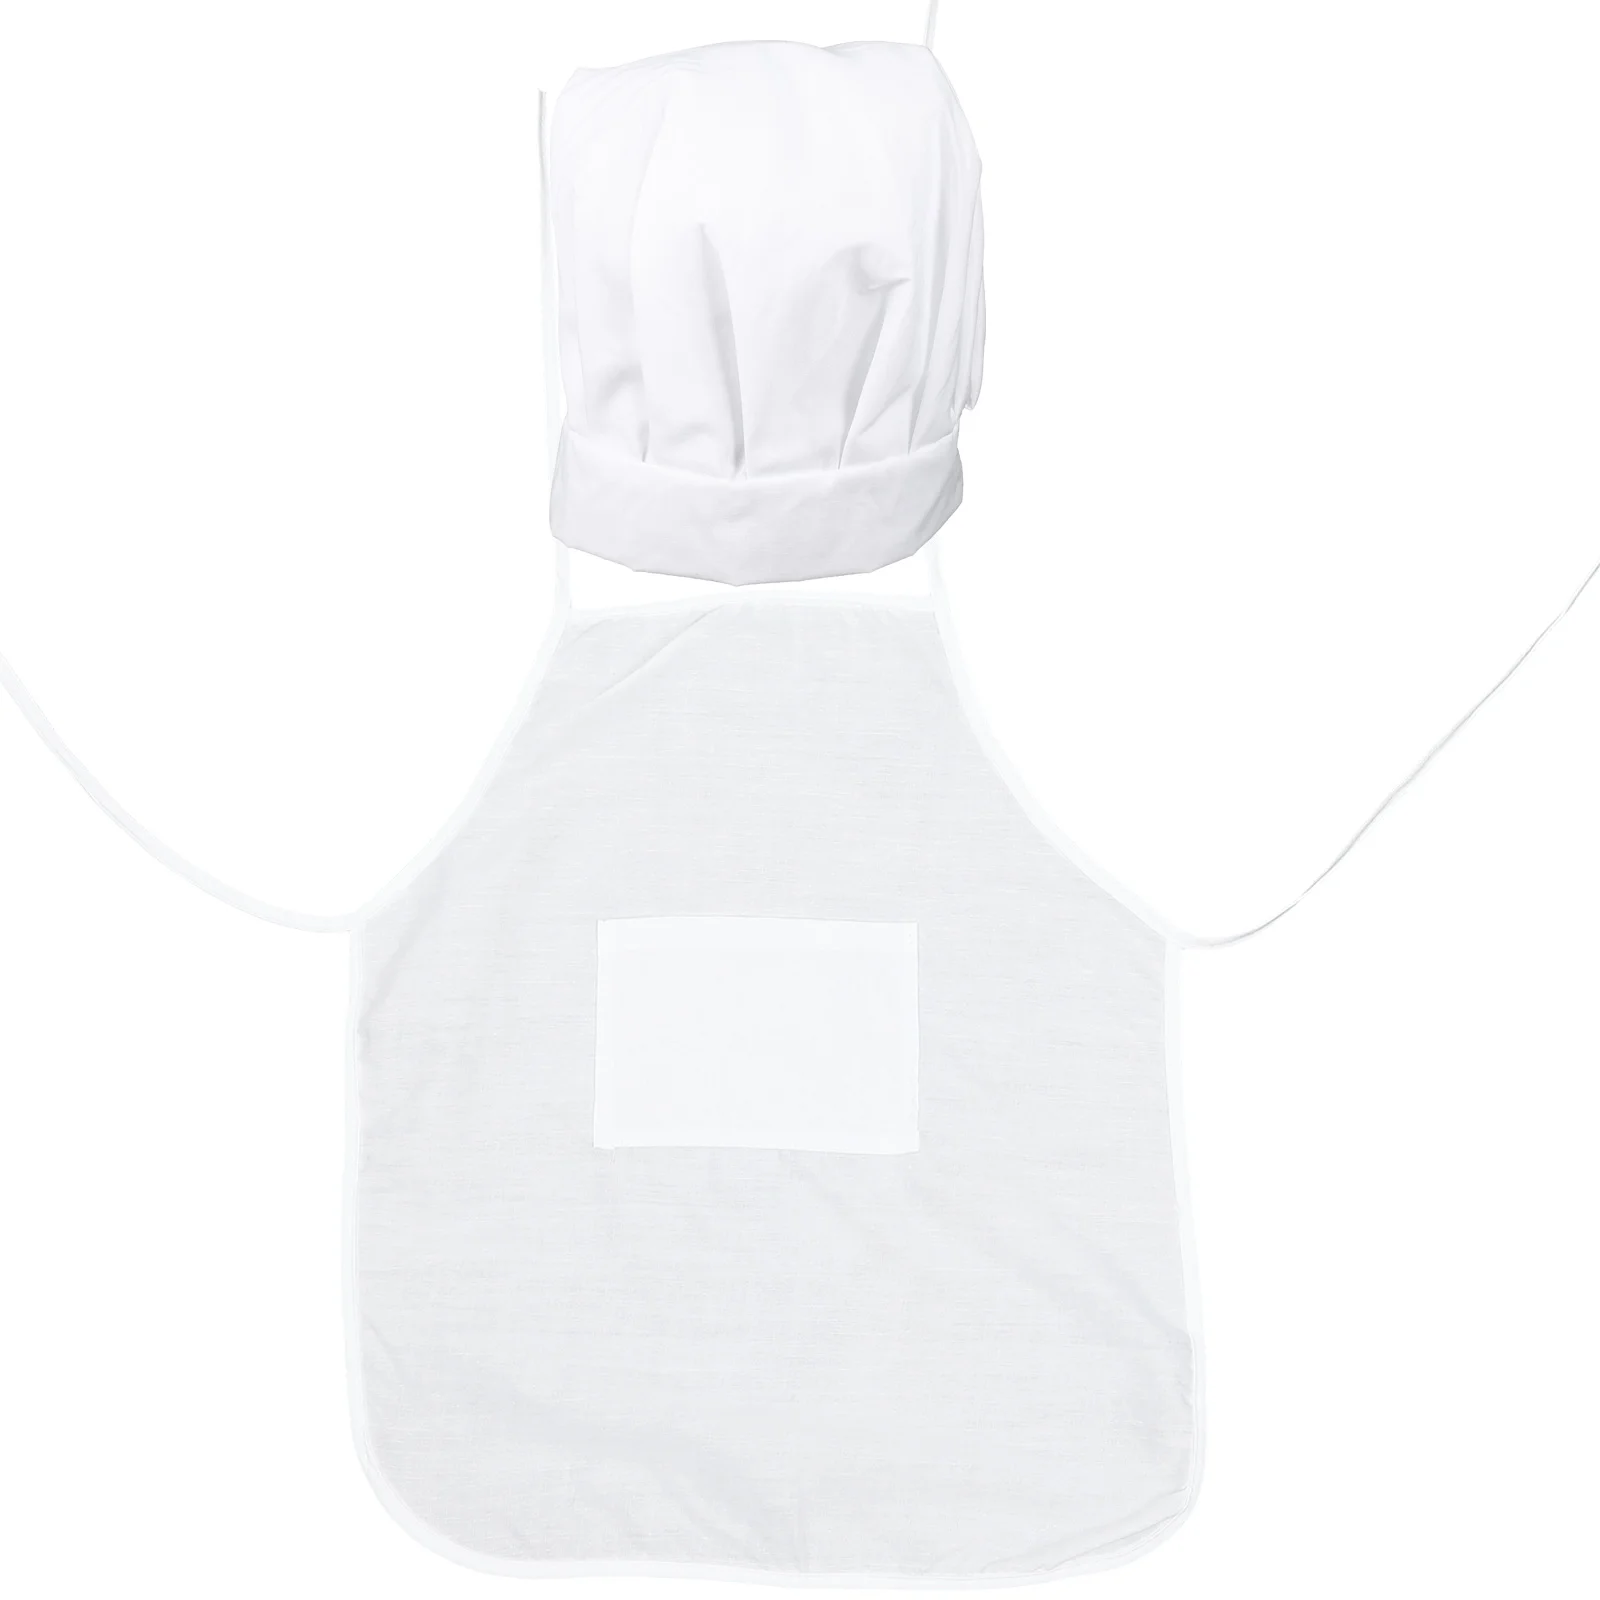 

Children's Suit Career Role Play Apron Kitchen Baking Cooking Hat Chef Costume Sleeveless Housework Head-wear Boy Toddler